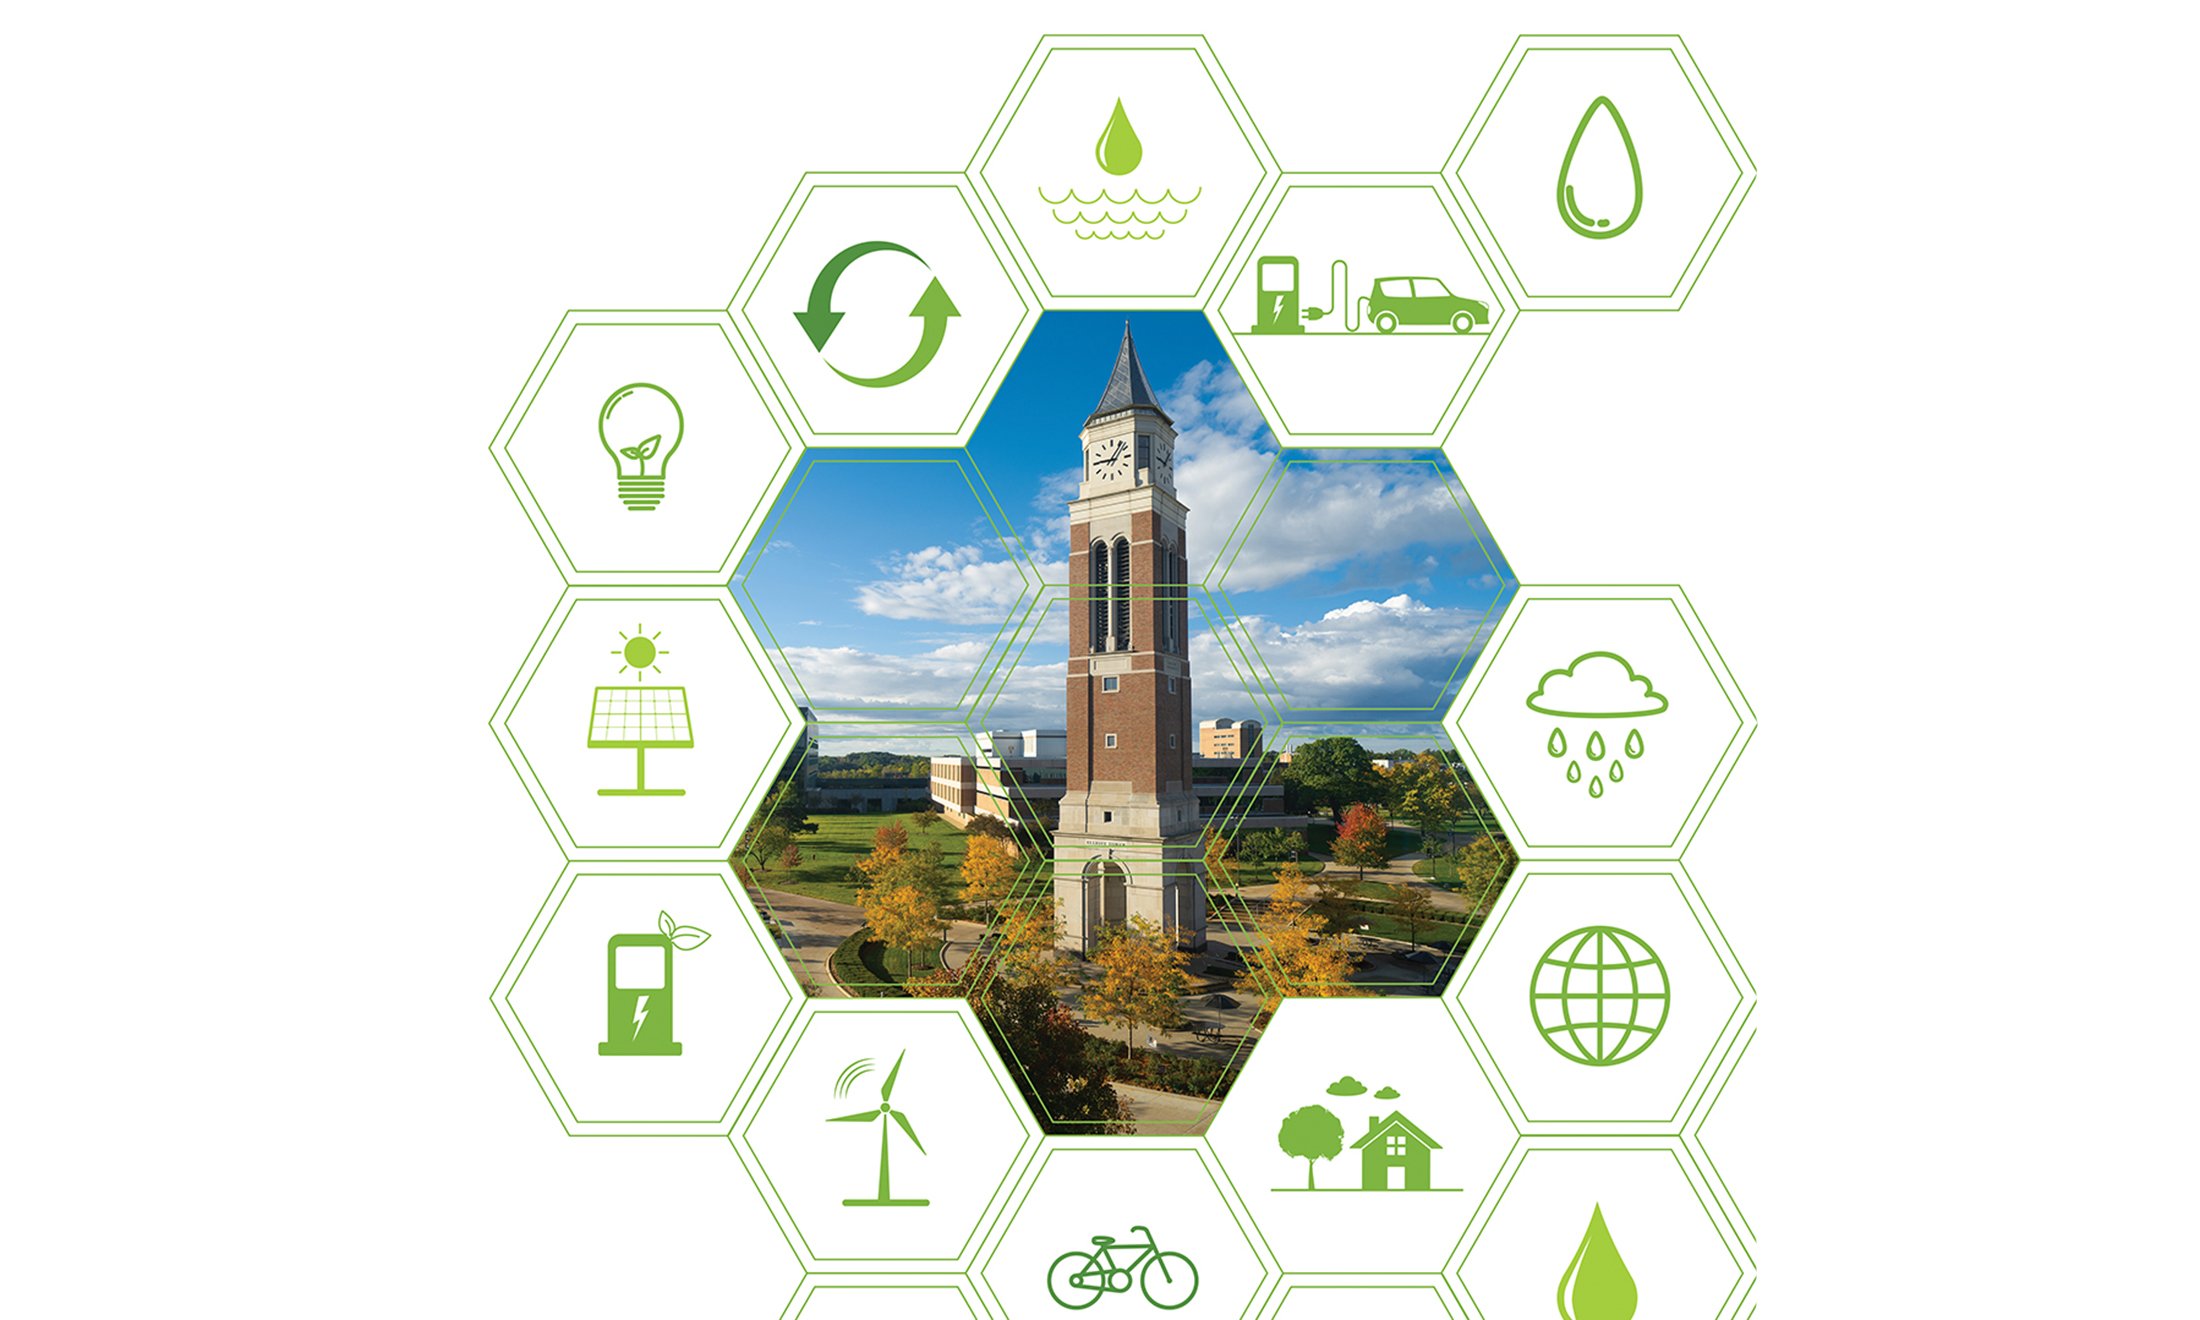 Different clipart photos in hexagons surrounding a picture of Elliott Tower